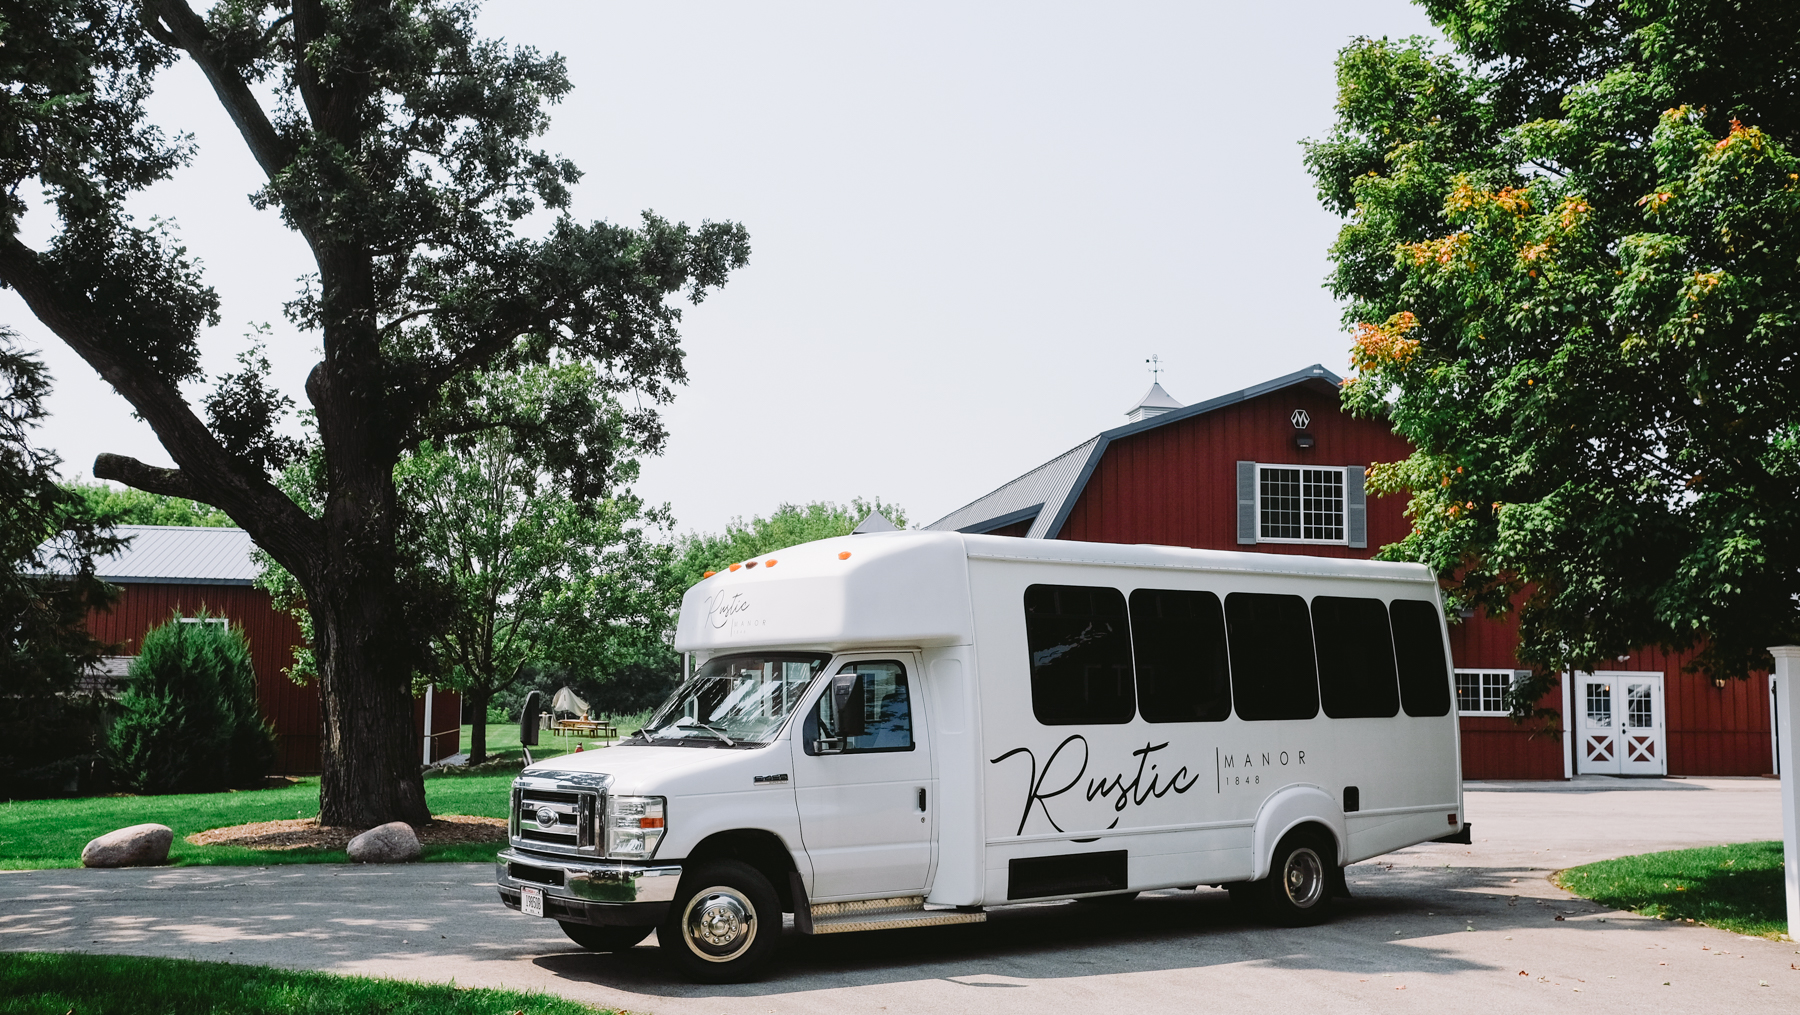 The Rustic Manor shuttle sits outside the business.